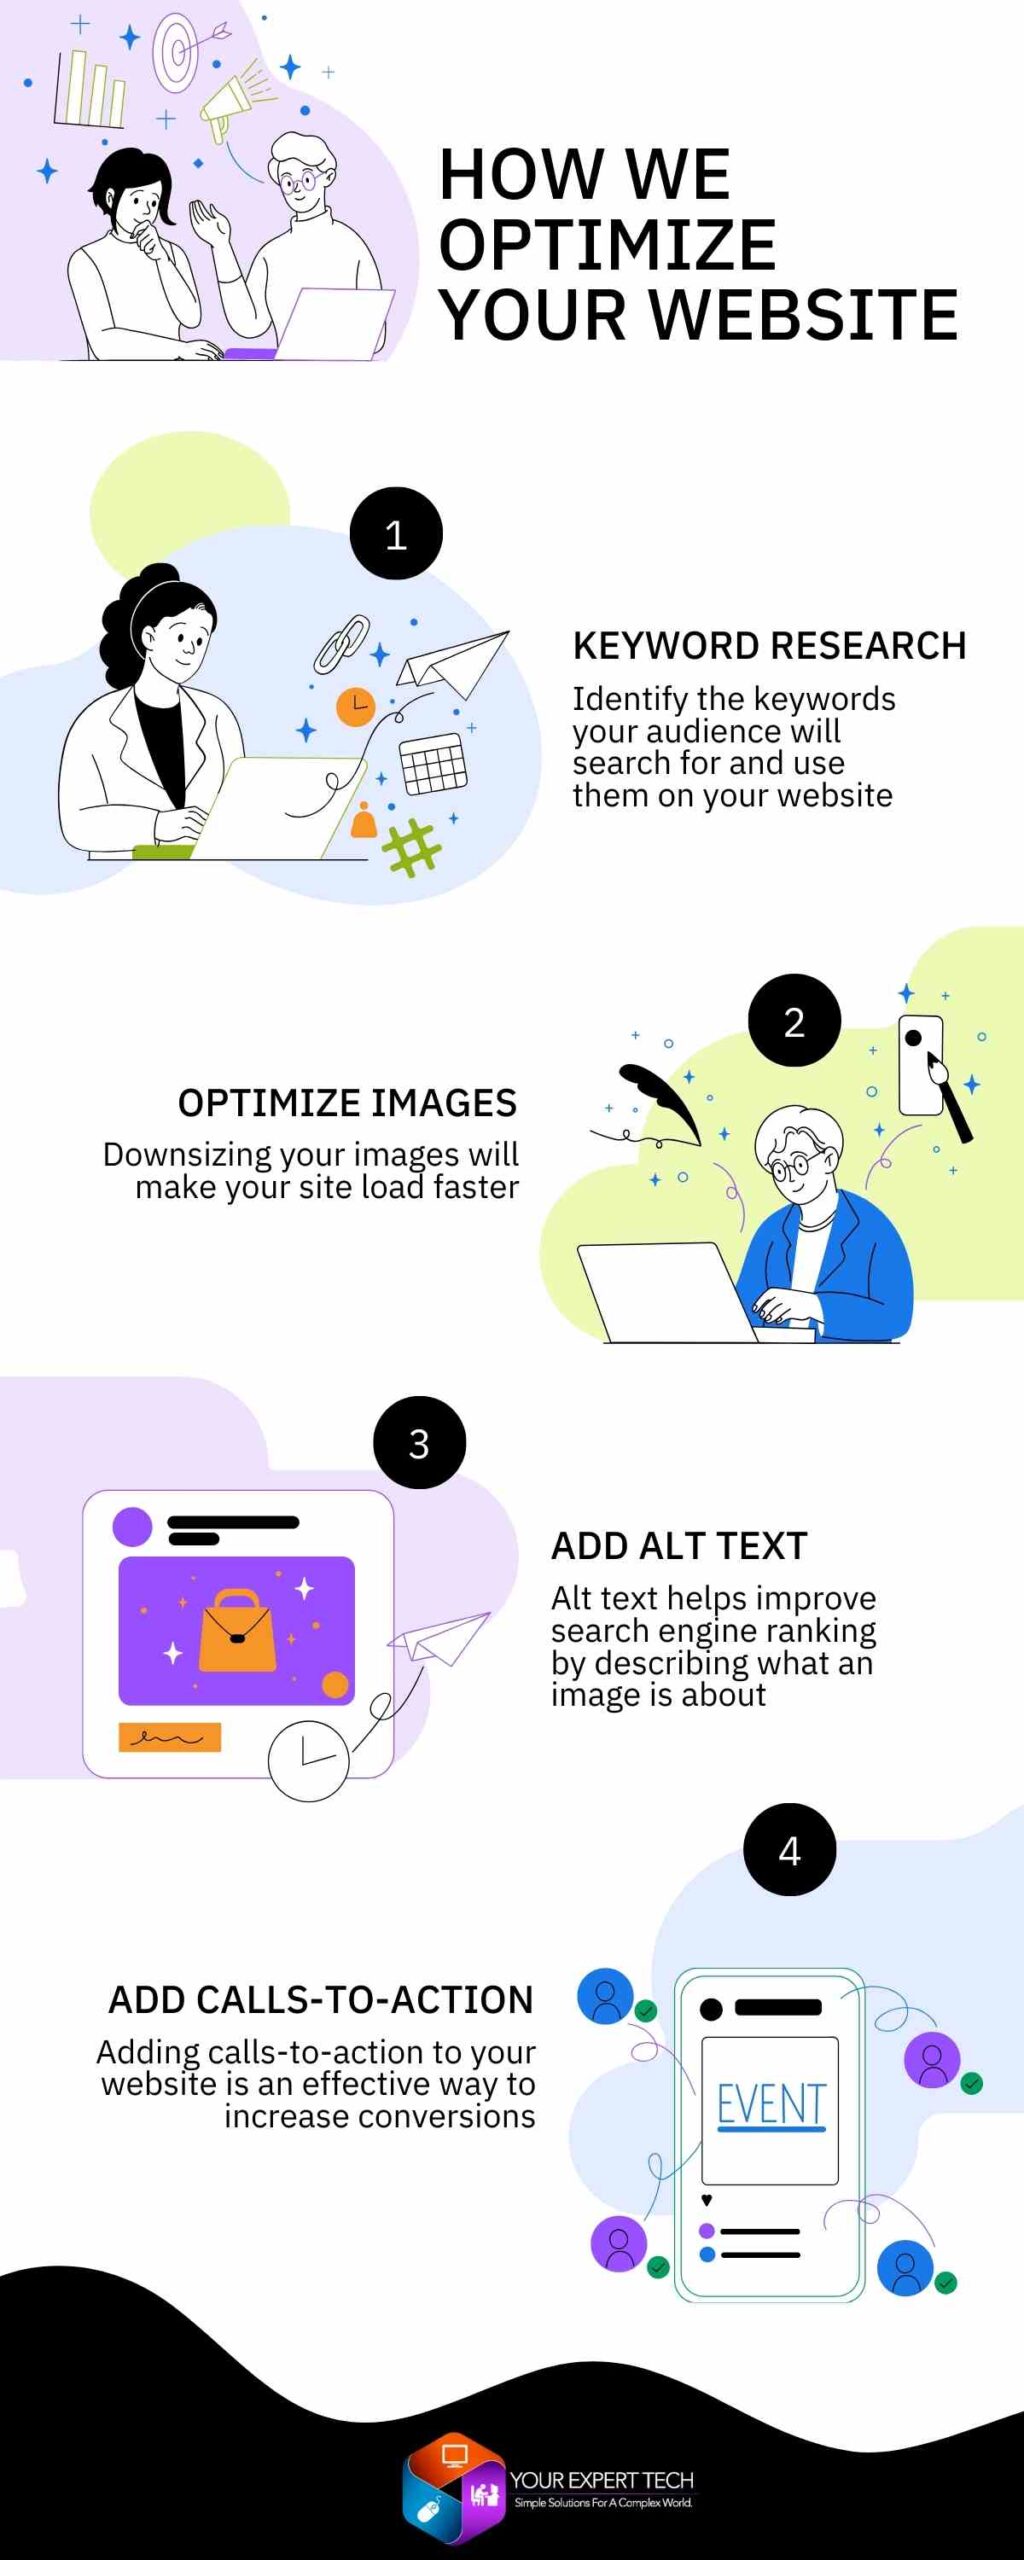 "Infographic detailing the process of website optimization, featuring steps such as SEO enhancement, mobile responsiveness, speed improvements, and content updates, illustrated with icons and flowcharts."